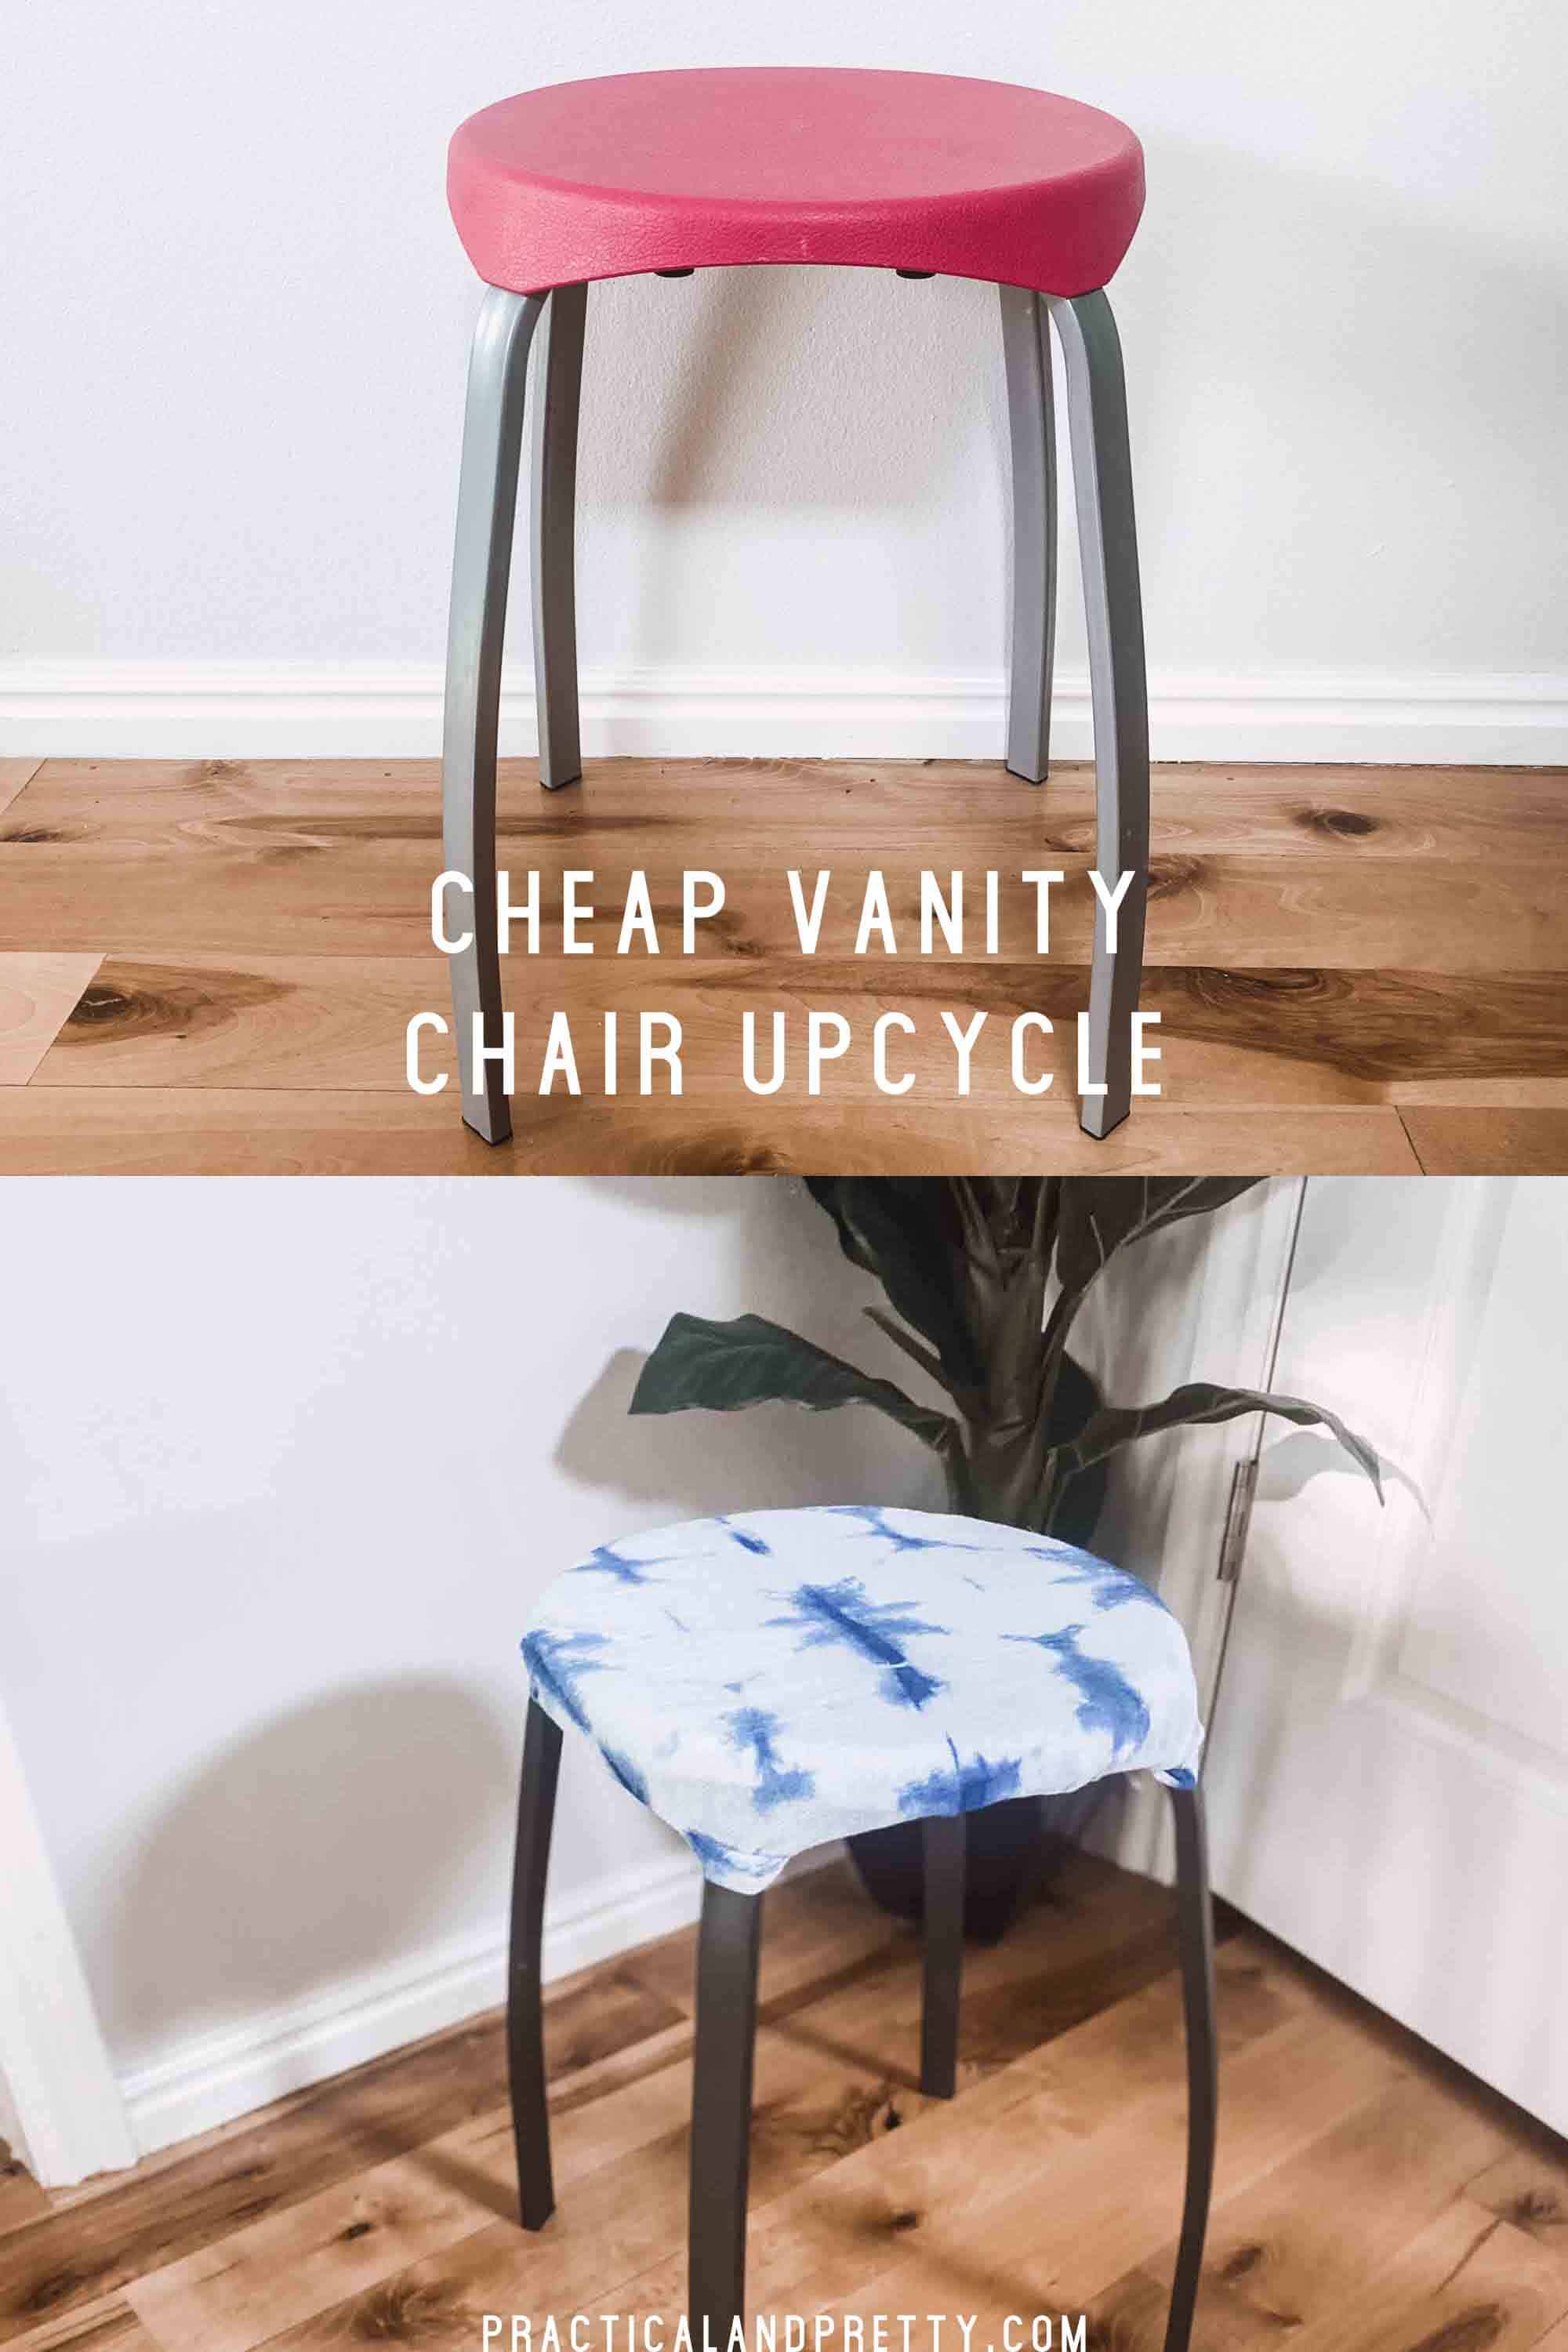  I took this cheap vanity chair and gave it a little makeover using some tie dye and spray paint. It took me maybe 20 minutes!